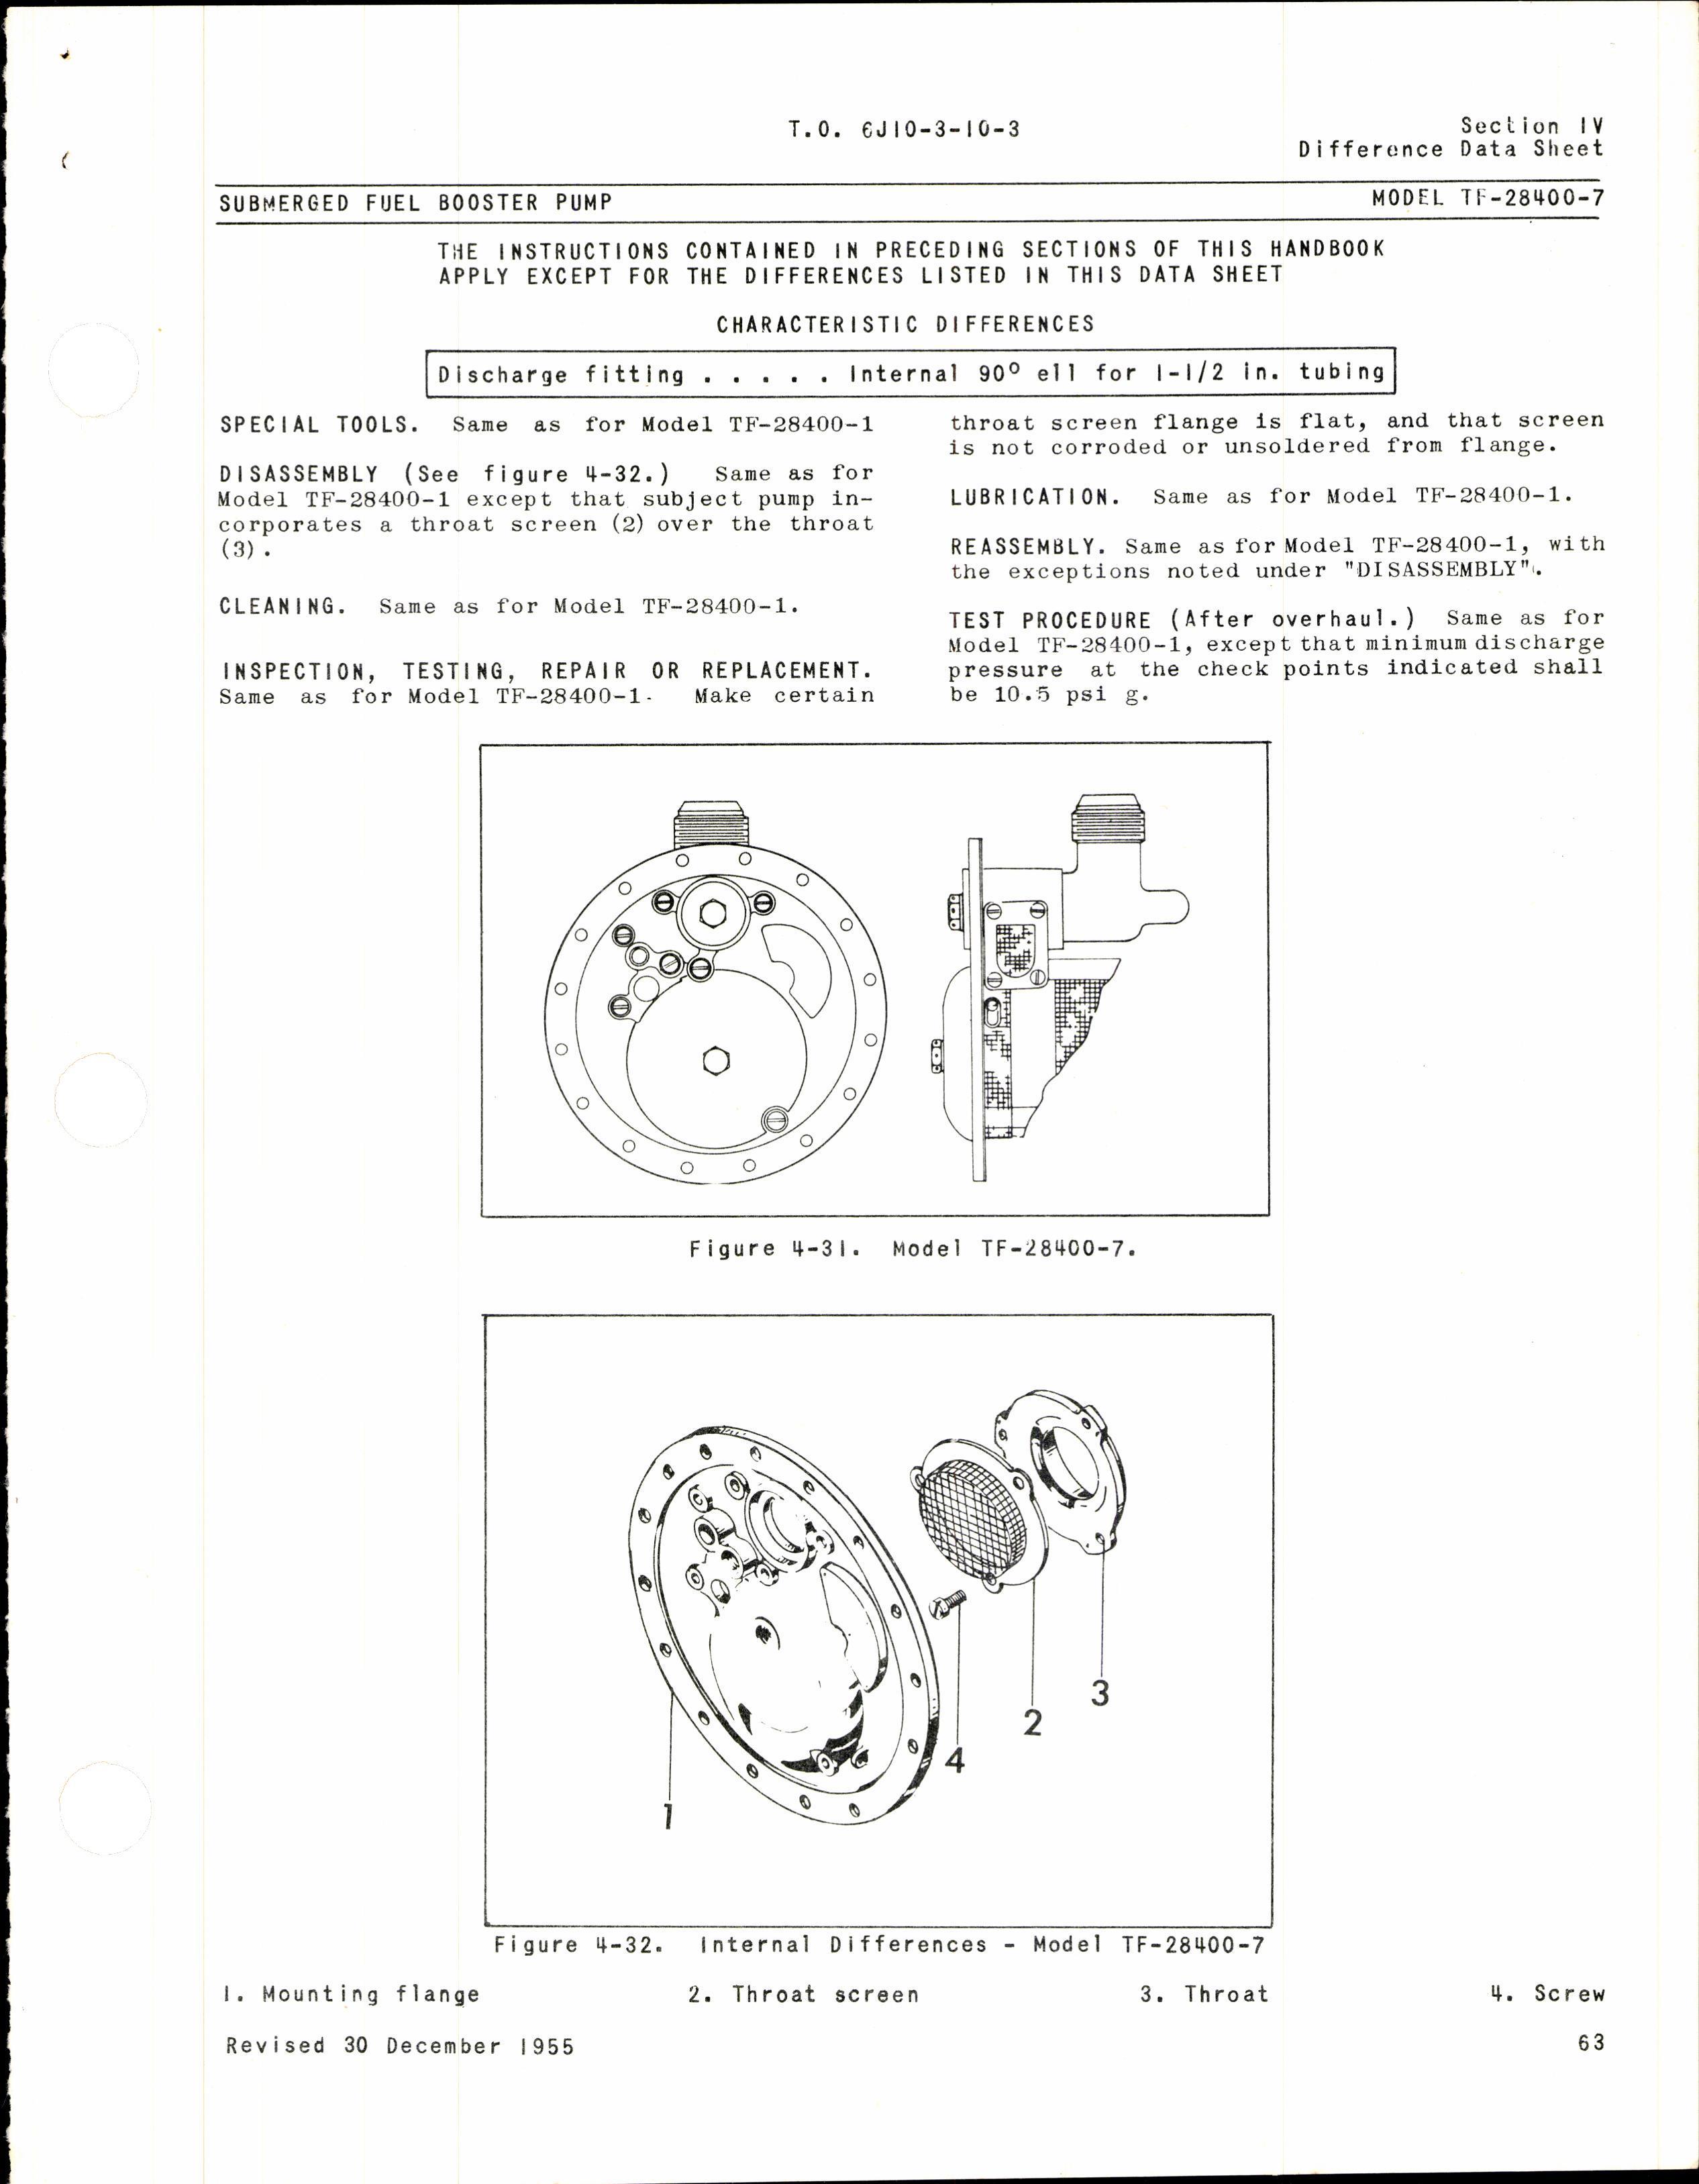 Sample page 41 from AirCorps Library document: Overhaul Instructions for Submerged Fuel Booster Pumps